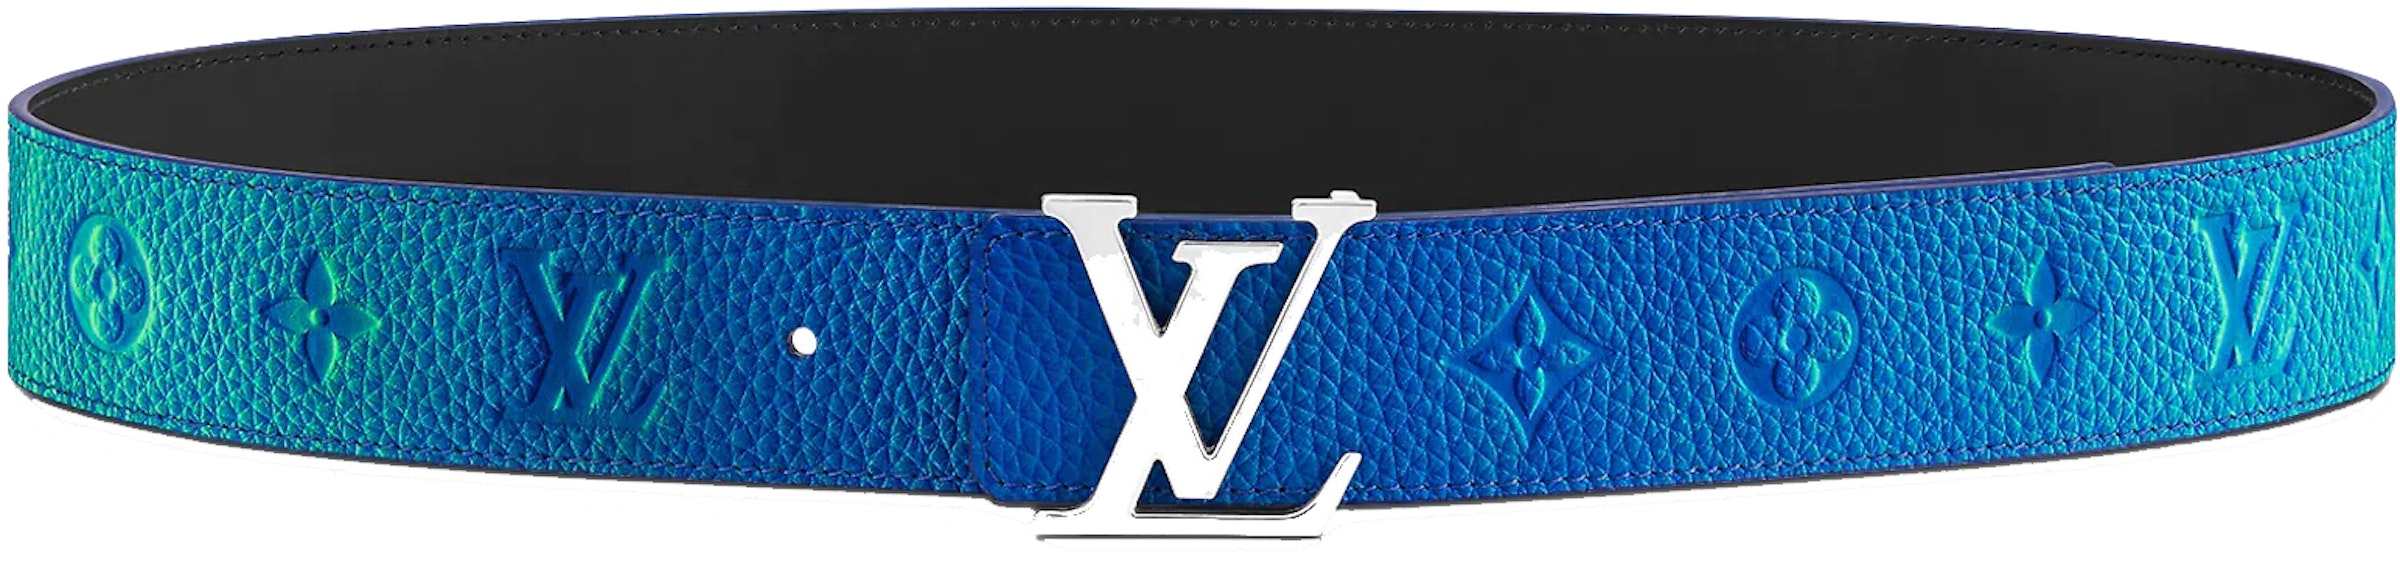 LV Initiales 30mm Reversible Belt Taurillon - Accessories